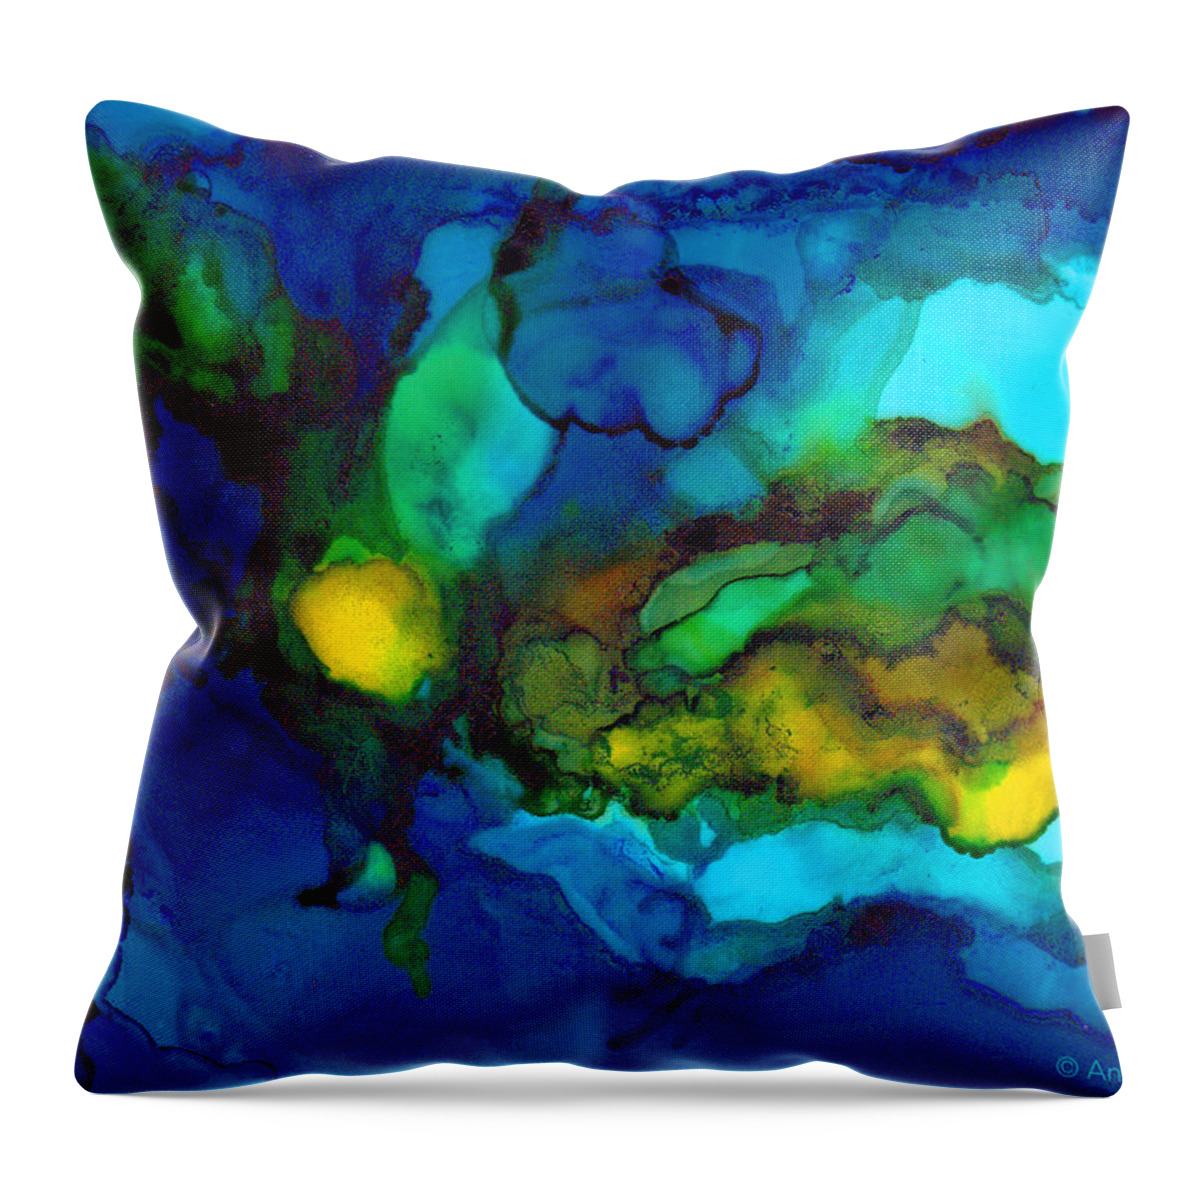 Island Throw Pillow featuring the painting Islands by Angela Treat Lyon